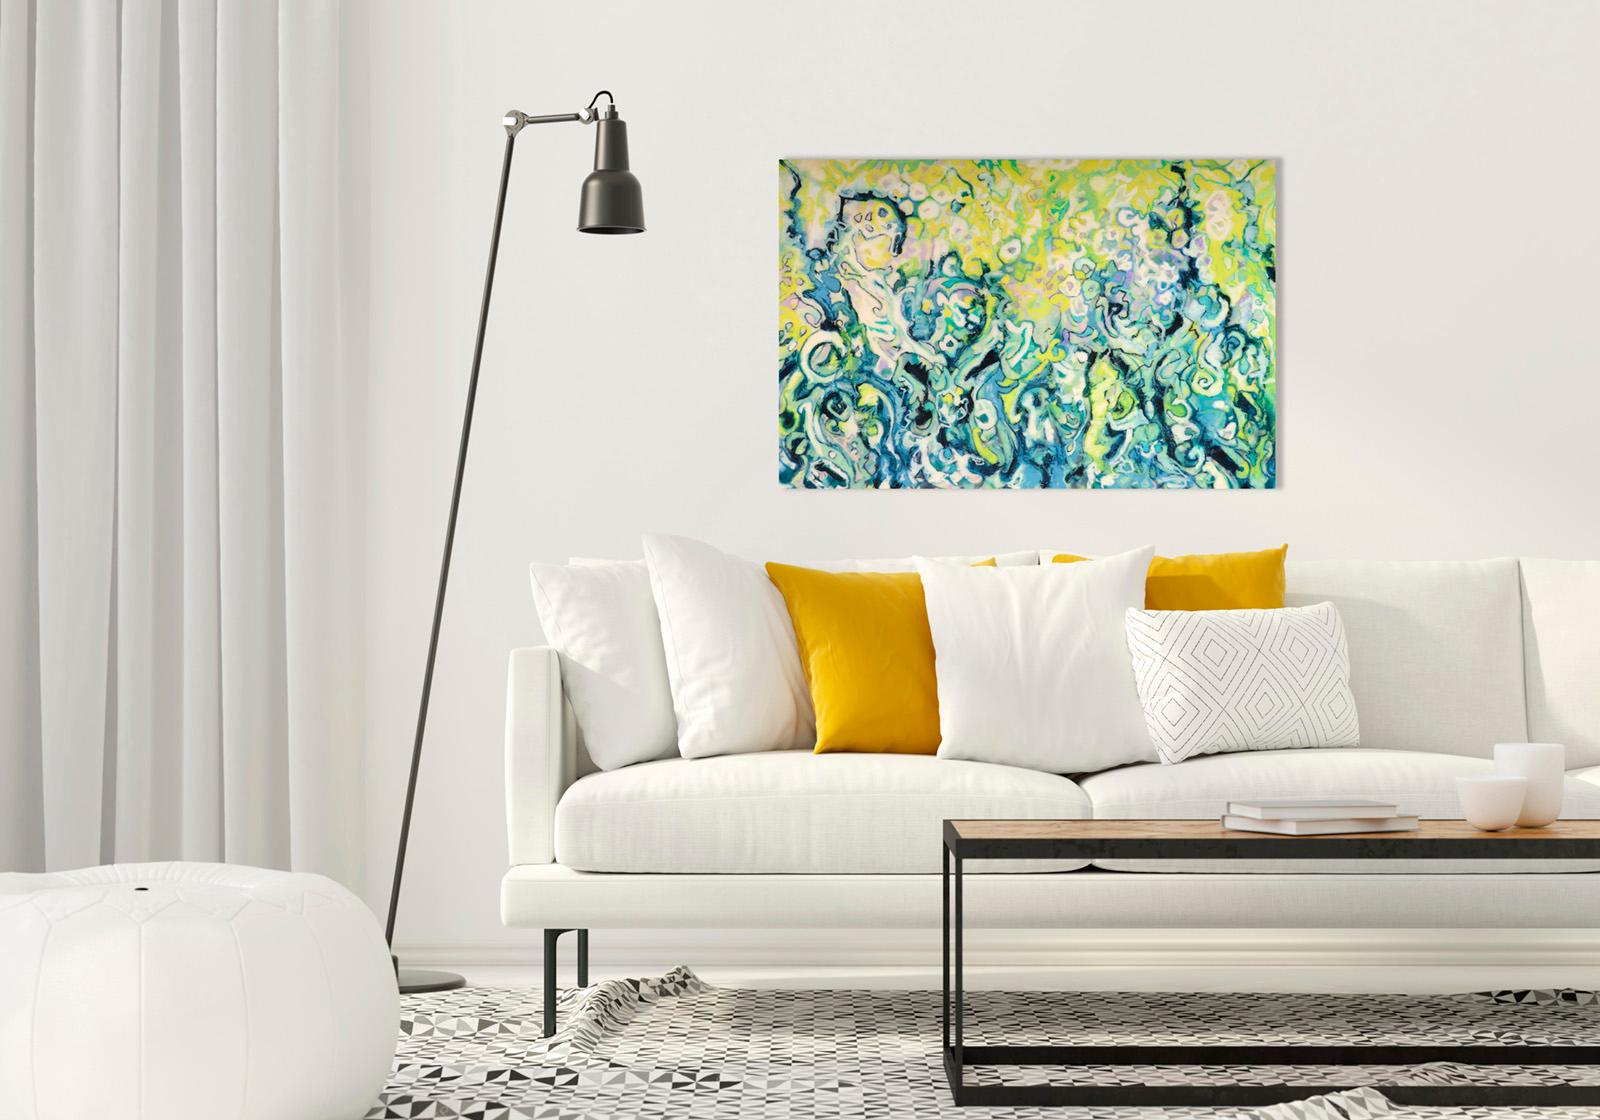 “Garden Dreams”, ornamental patterns in turquoise and yellows swirl overall   - Painting by Rebecca Darlington